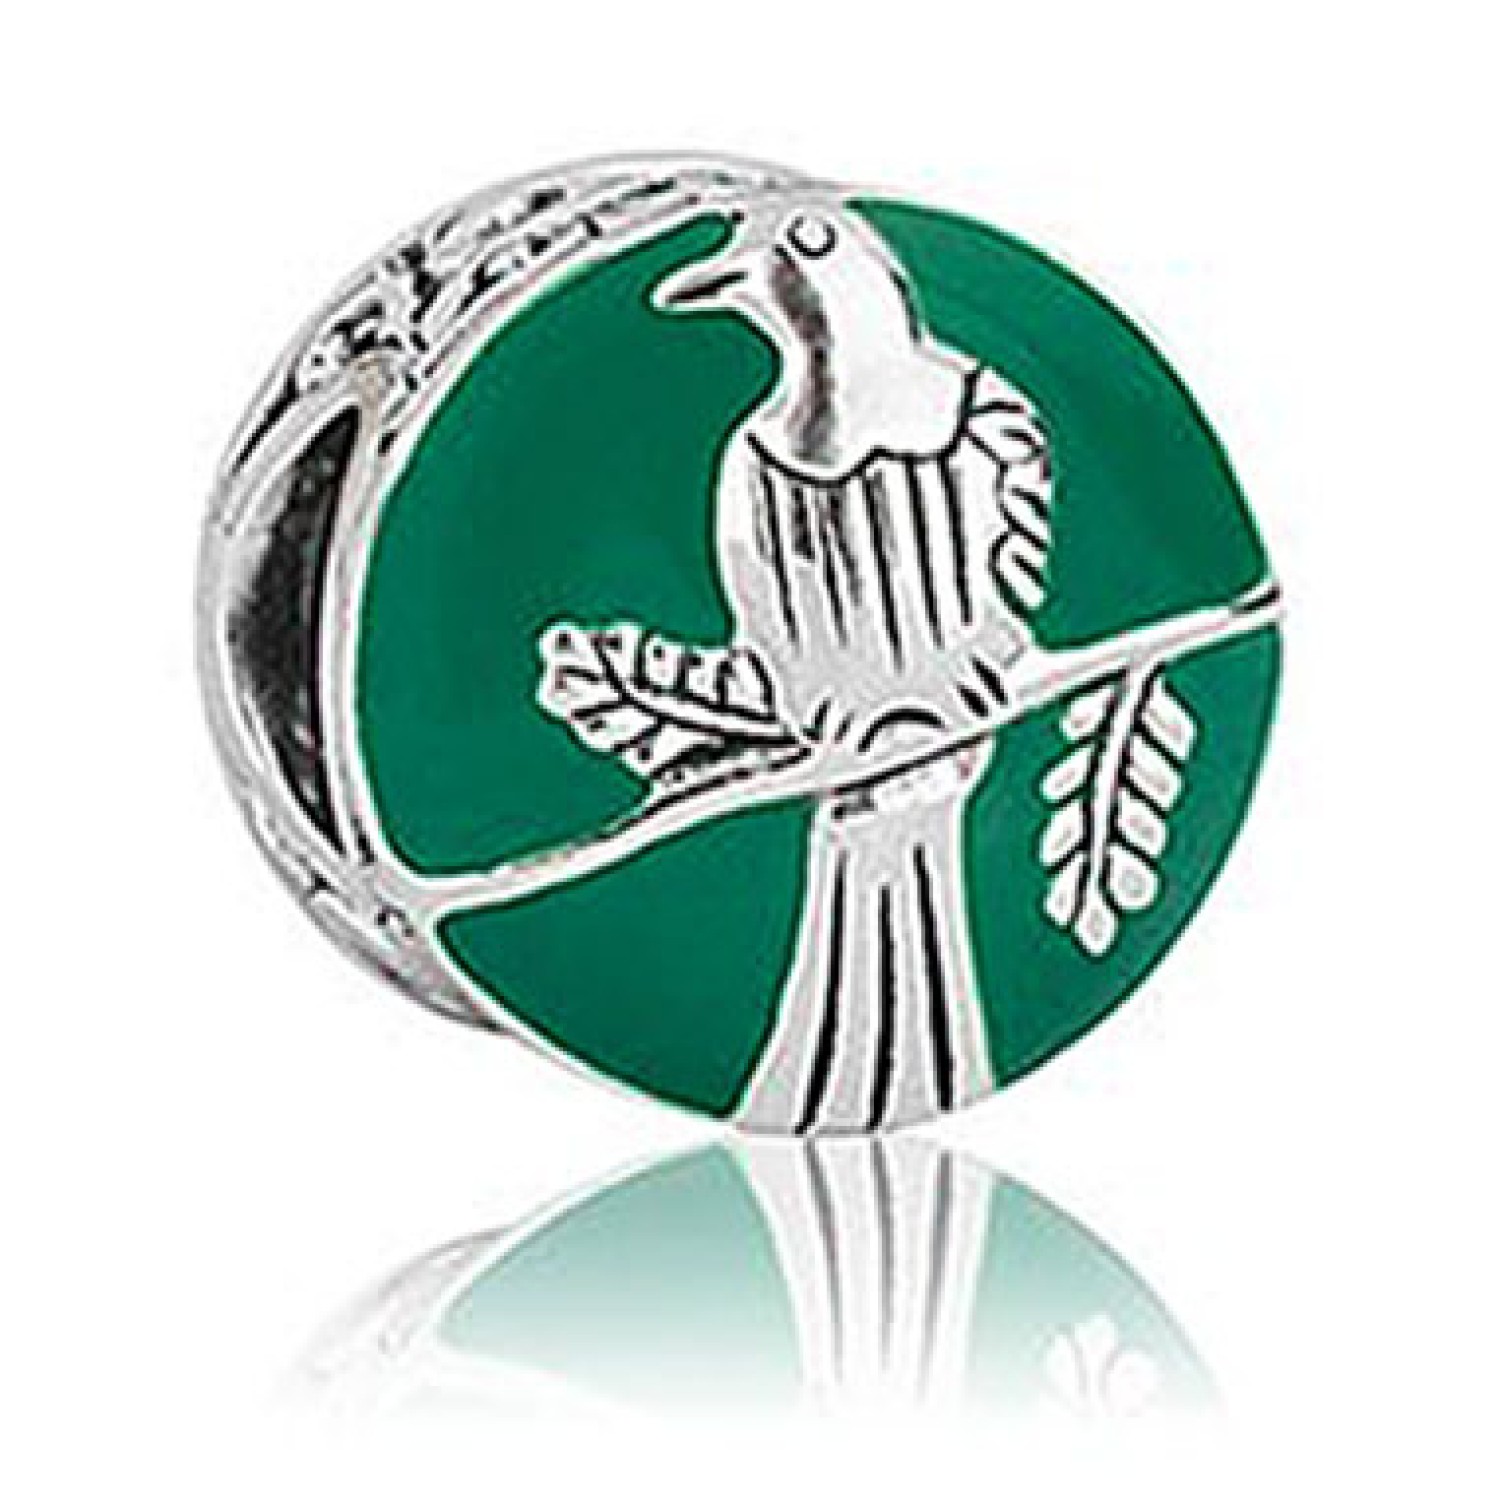 LKE044 Evolve Charm NZ Kereru Bird. The noisy beat of the Kereru’s wings is a distinctive sound in our native forests. Endemic to Aotearoa, the large New Zealand wood pigeon features beautiful iridescent green and bronze feathers. Also known as Kukupa or 